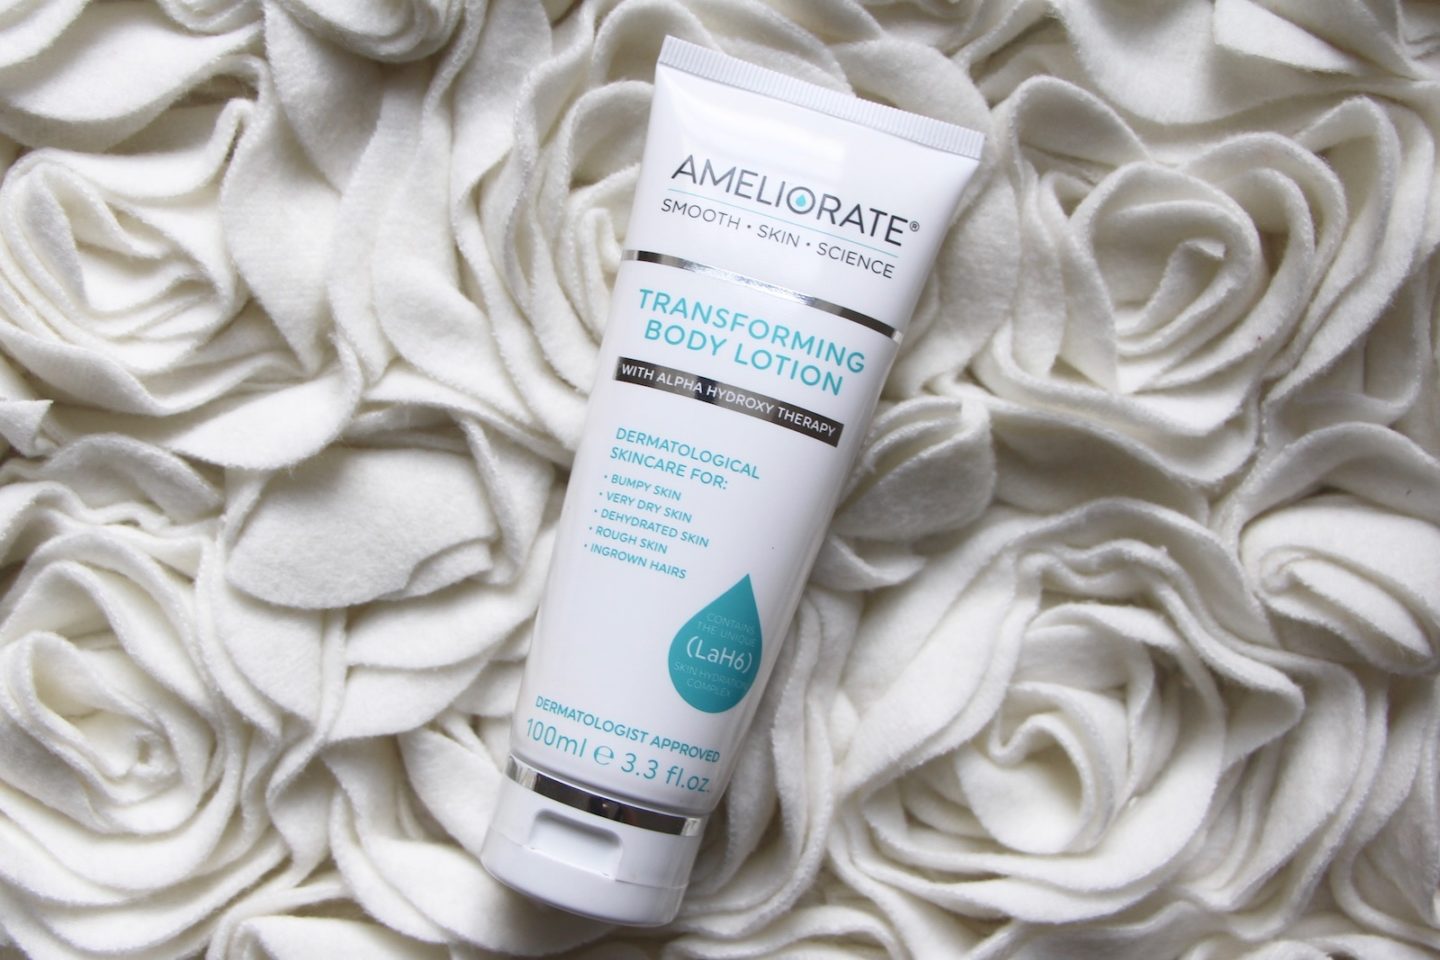 Ameliorate Transforming Body Lotion review